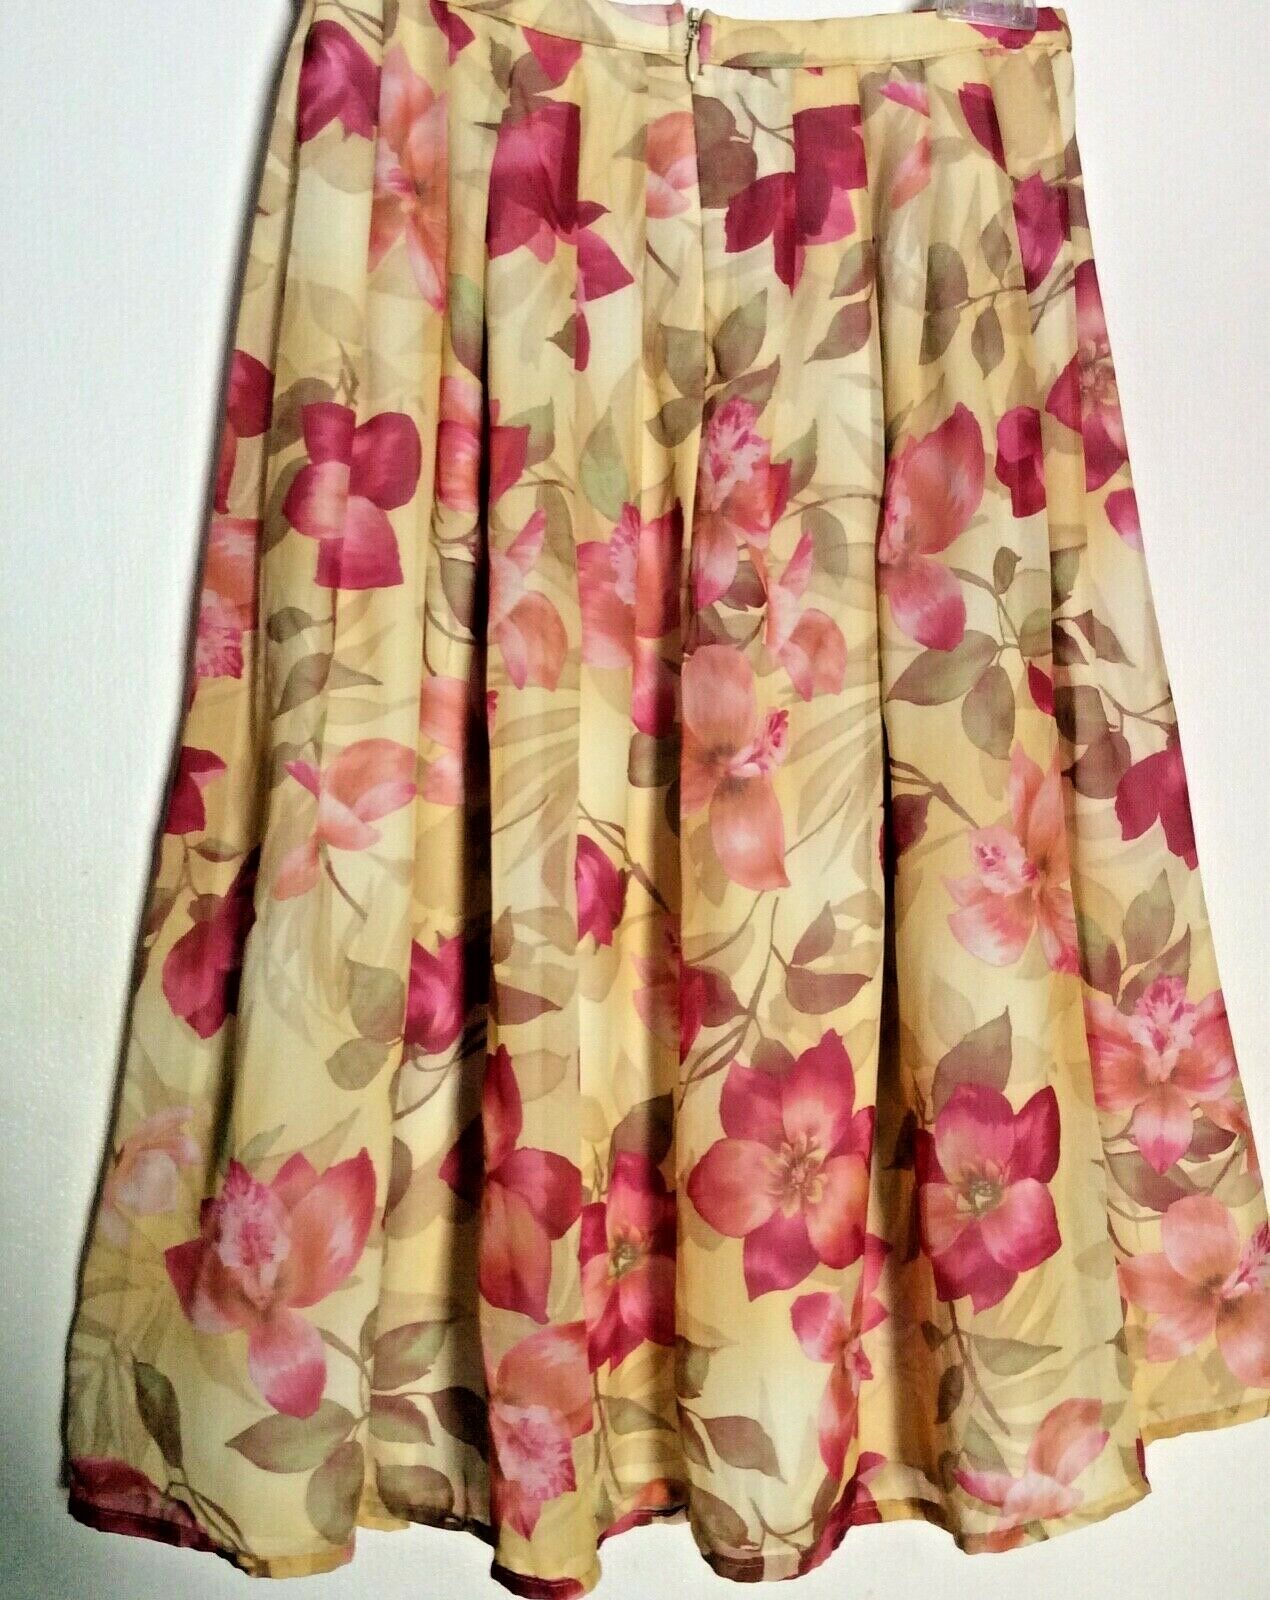 VTG MENGFEI Li*(14) YOUTH Chiffon Floral Skirt, Pleated Waist, Lined, pre-owned